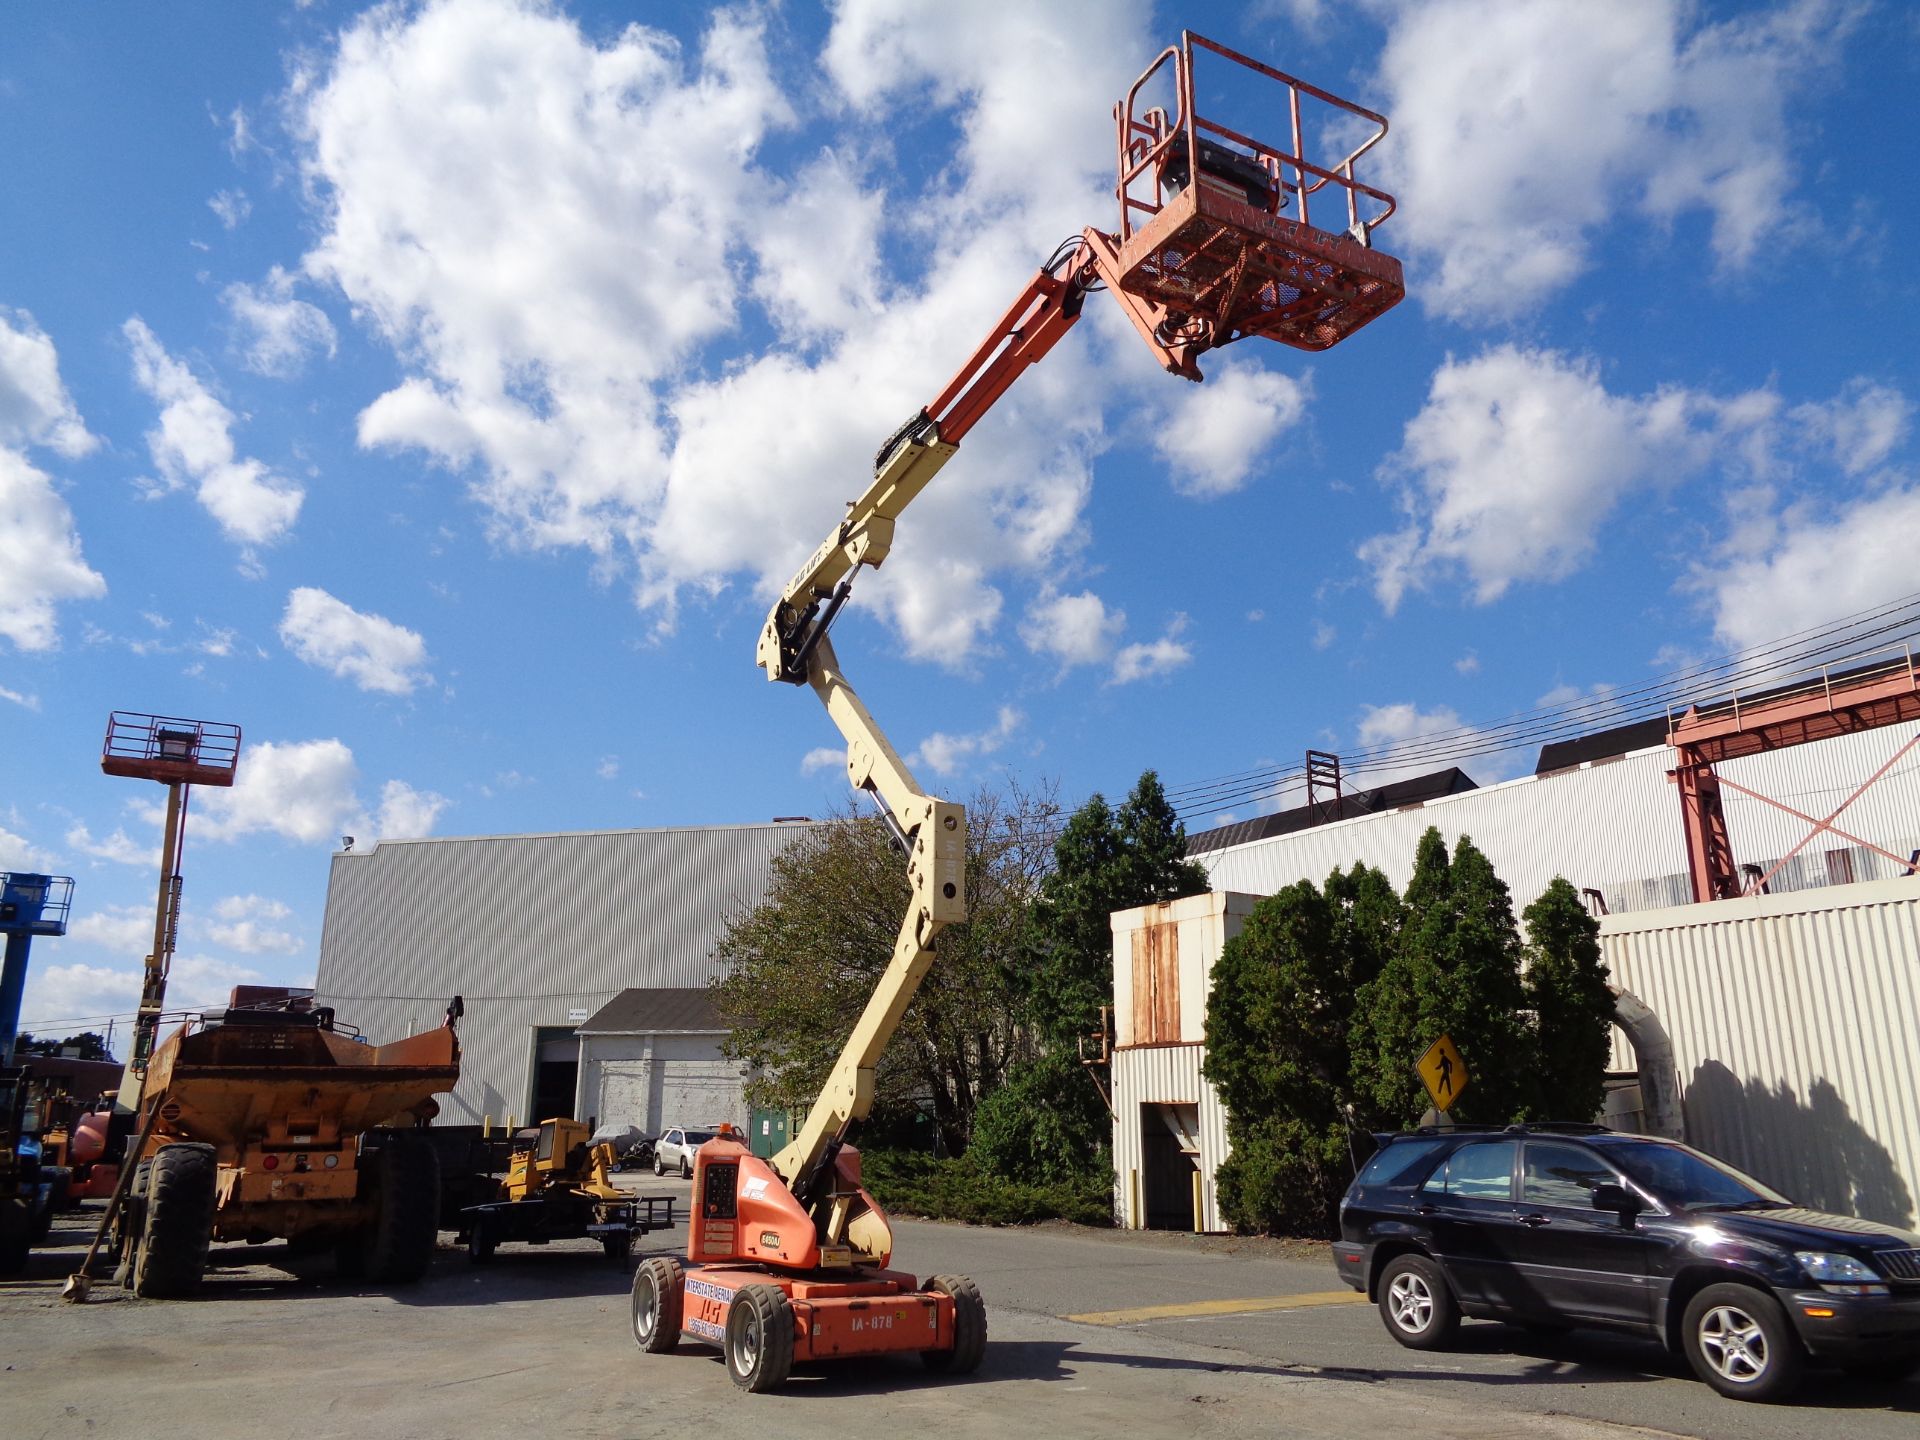 2002 JLG E450AJ 4x4 Electric Articulated Boom Lift - 45Ft Height - Image 6 of 17